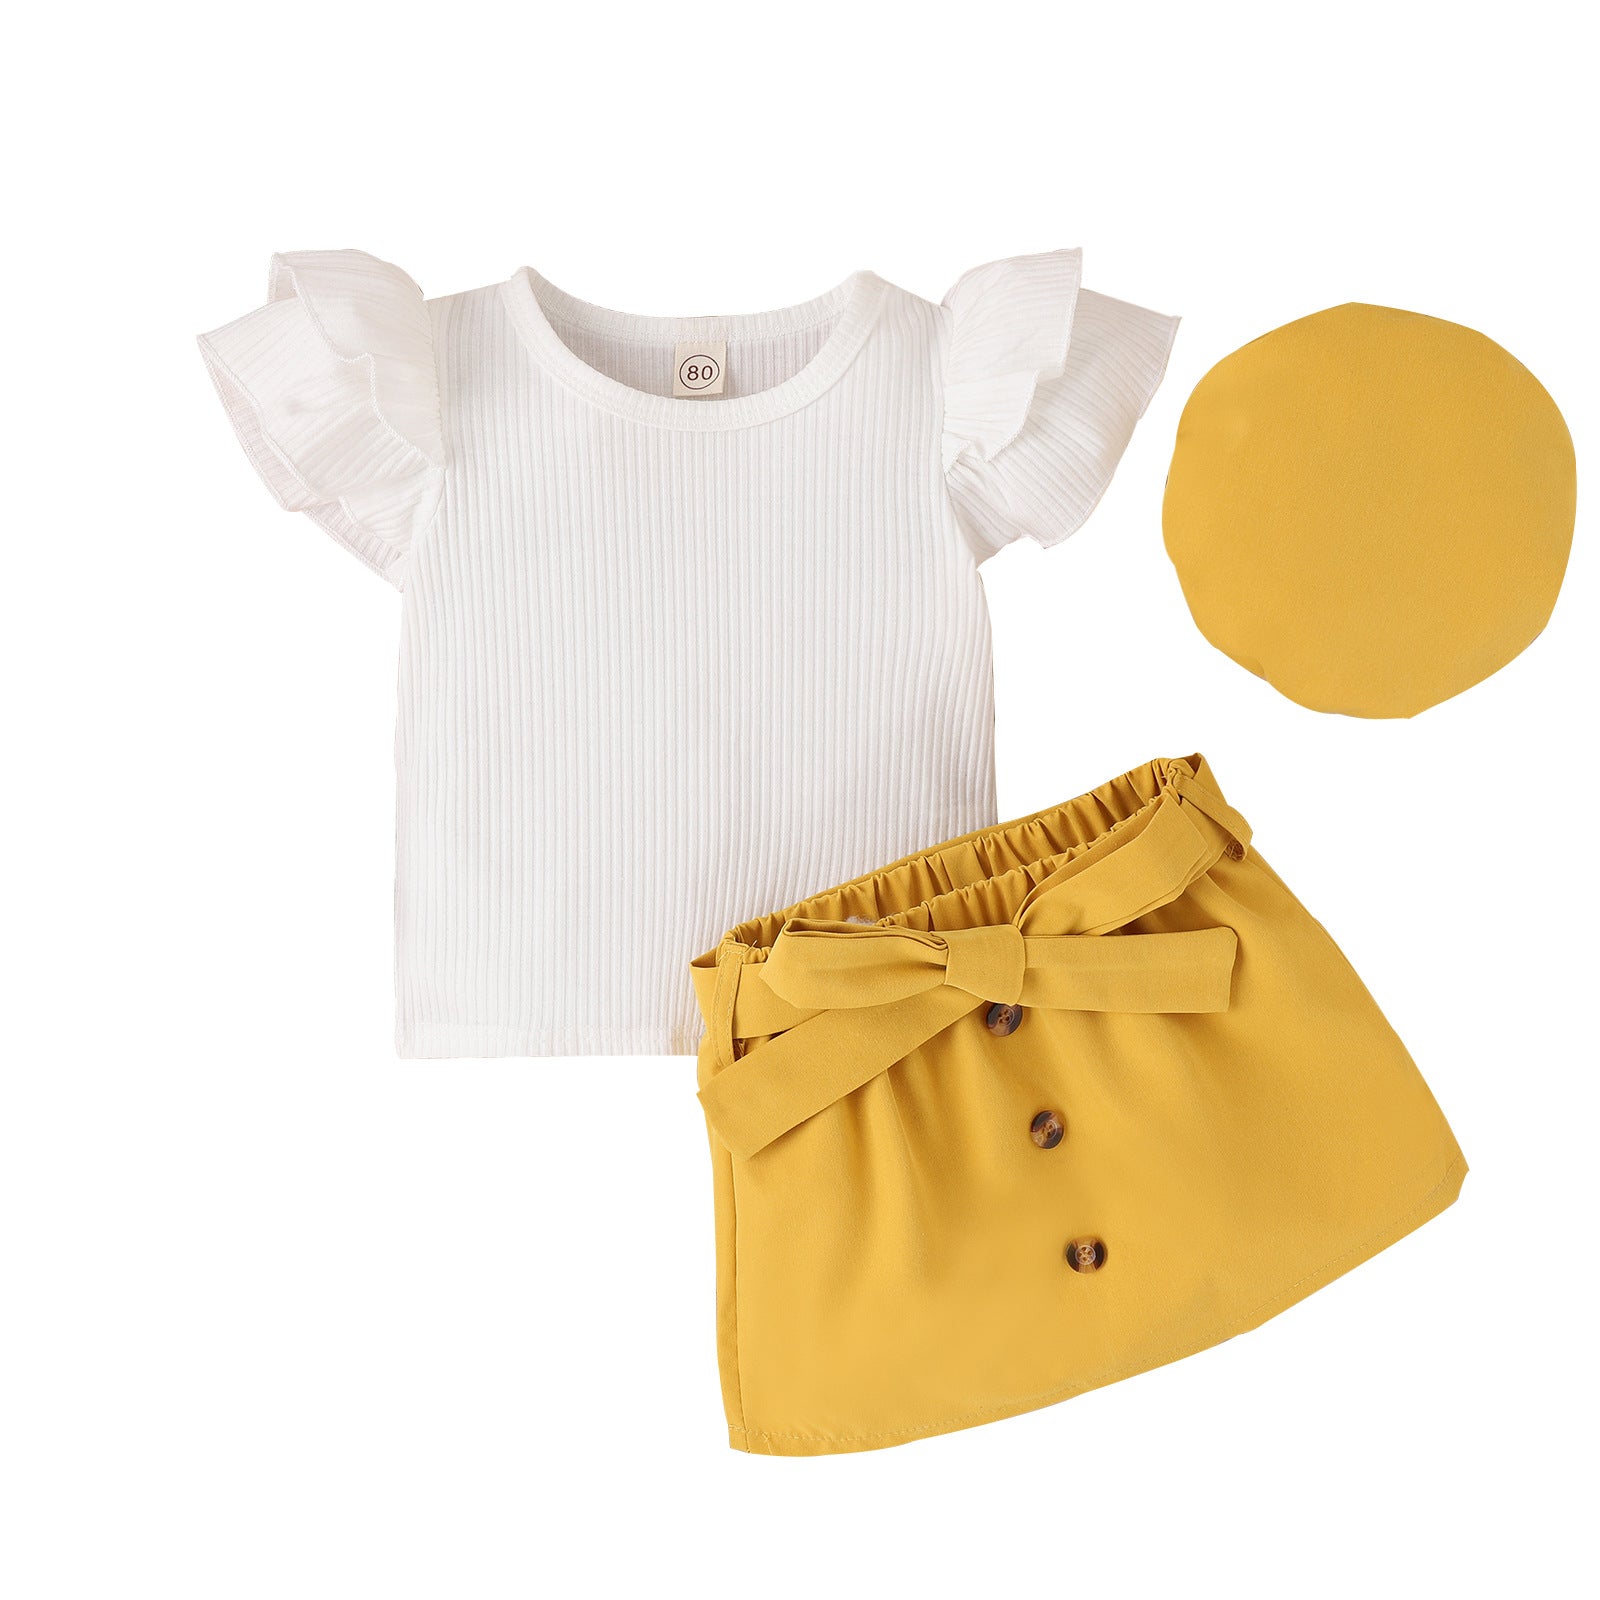 Sunny Yellow outfit with Ruffles and Bow